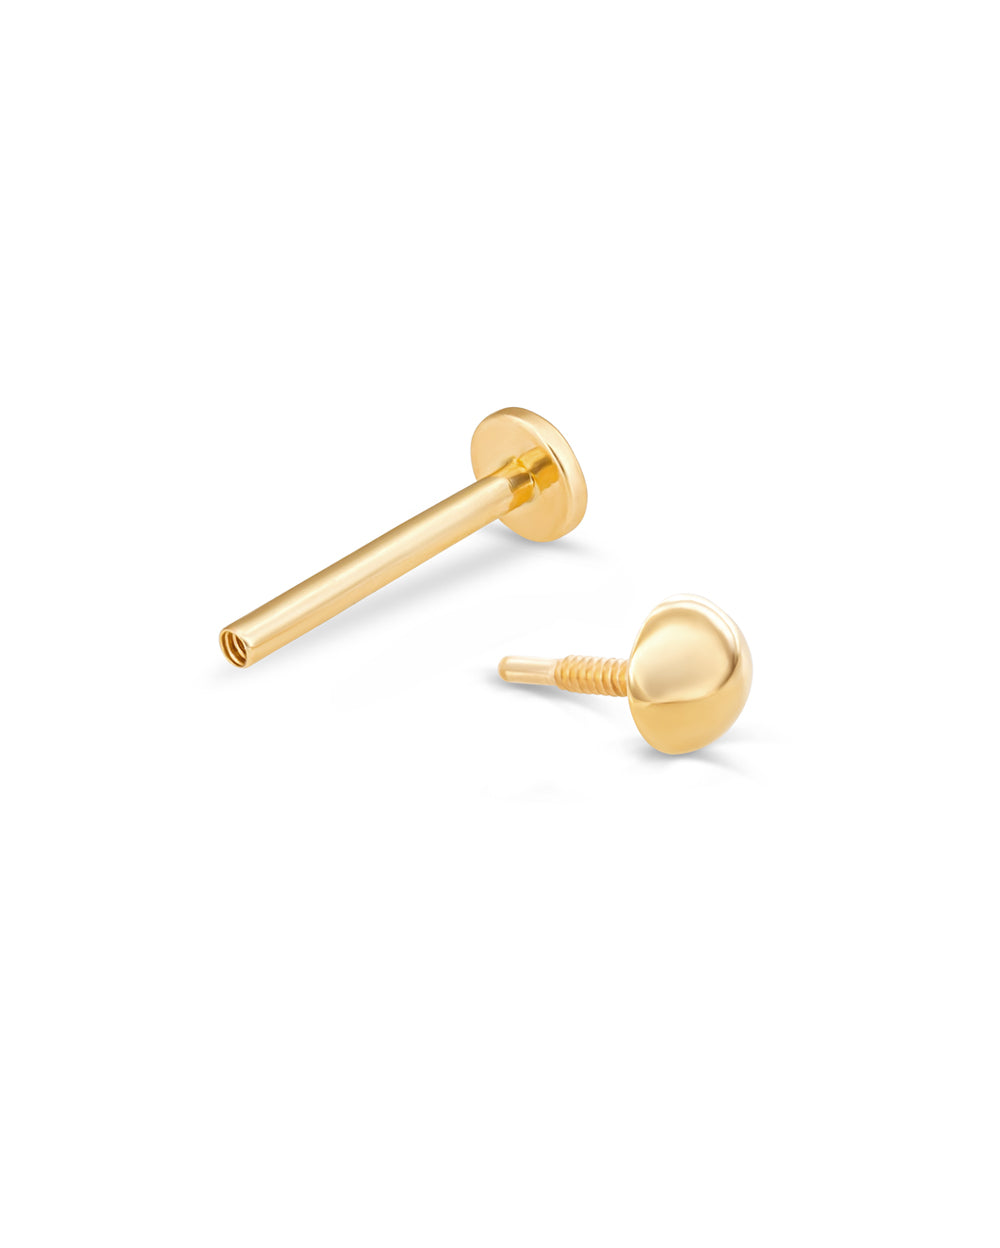 Covetear 3mm Sphere Cartilage Earring#material_14k_YELLOW_Gold